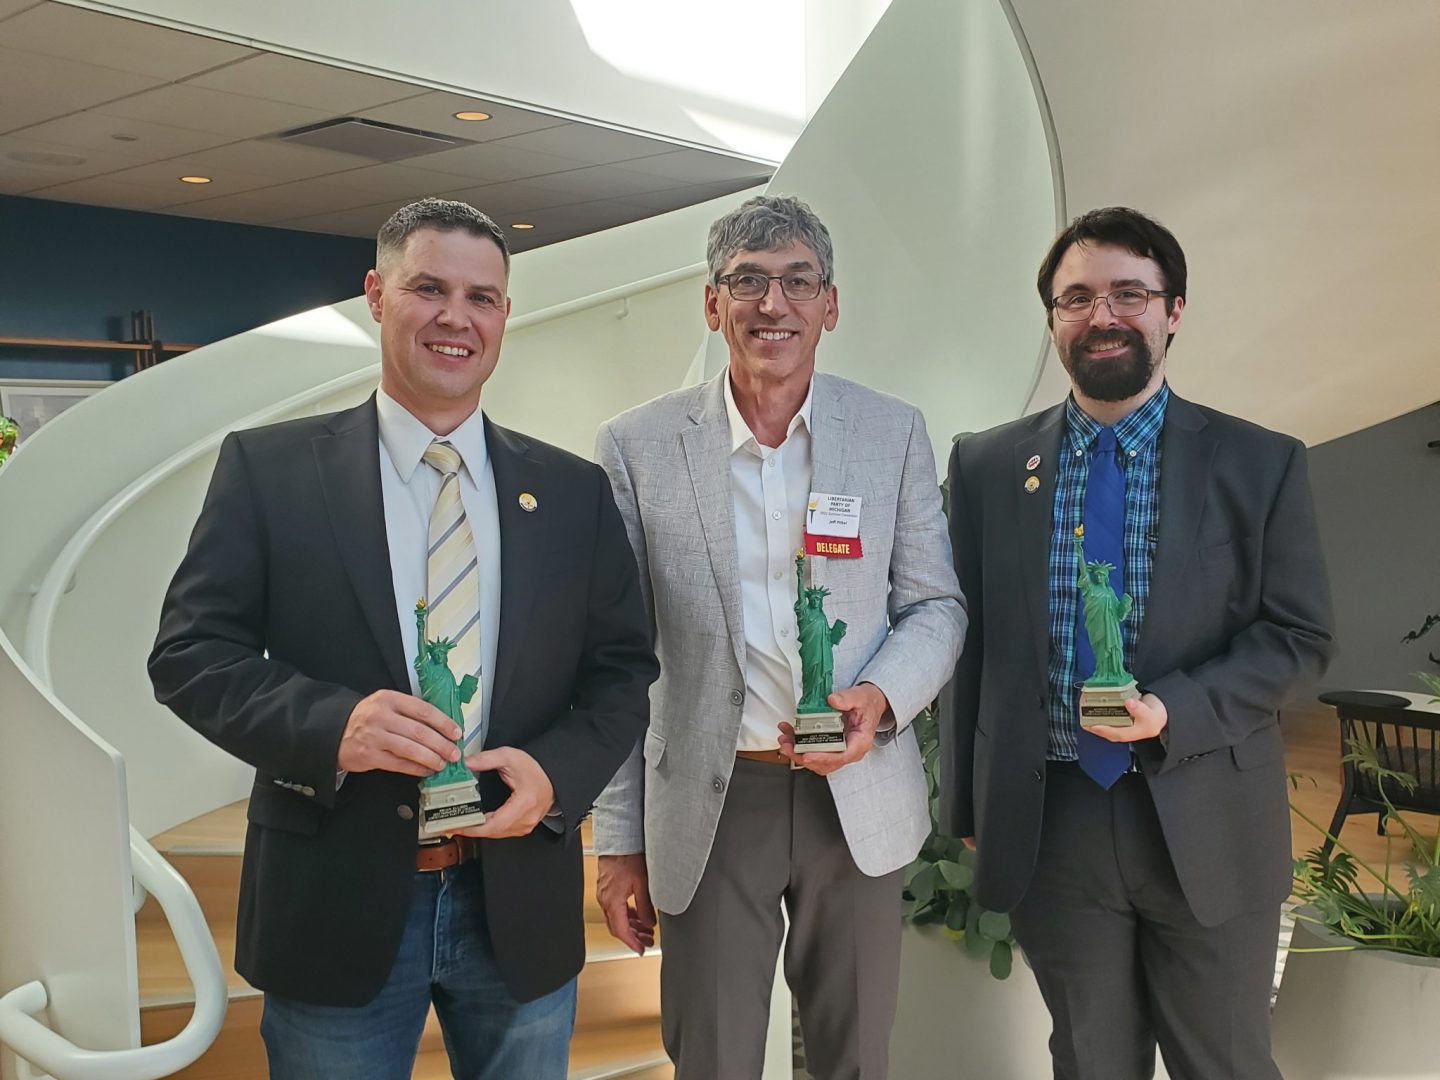 Three Defender of Liberty Award winners: Brian Ellison, Jeff Pittel, and Andrew Hall (left to right). Photo by Greg Stempfle.